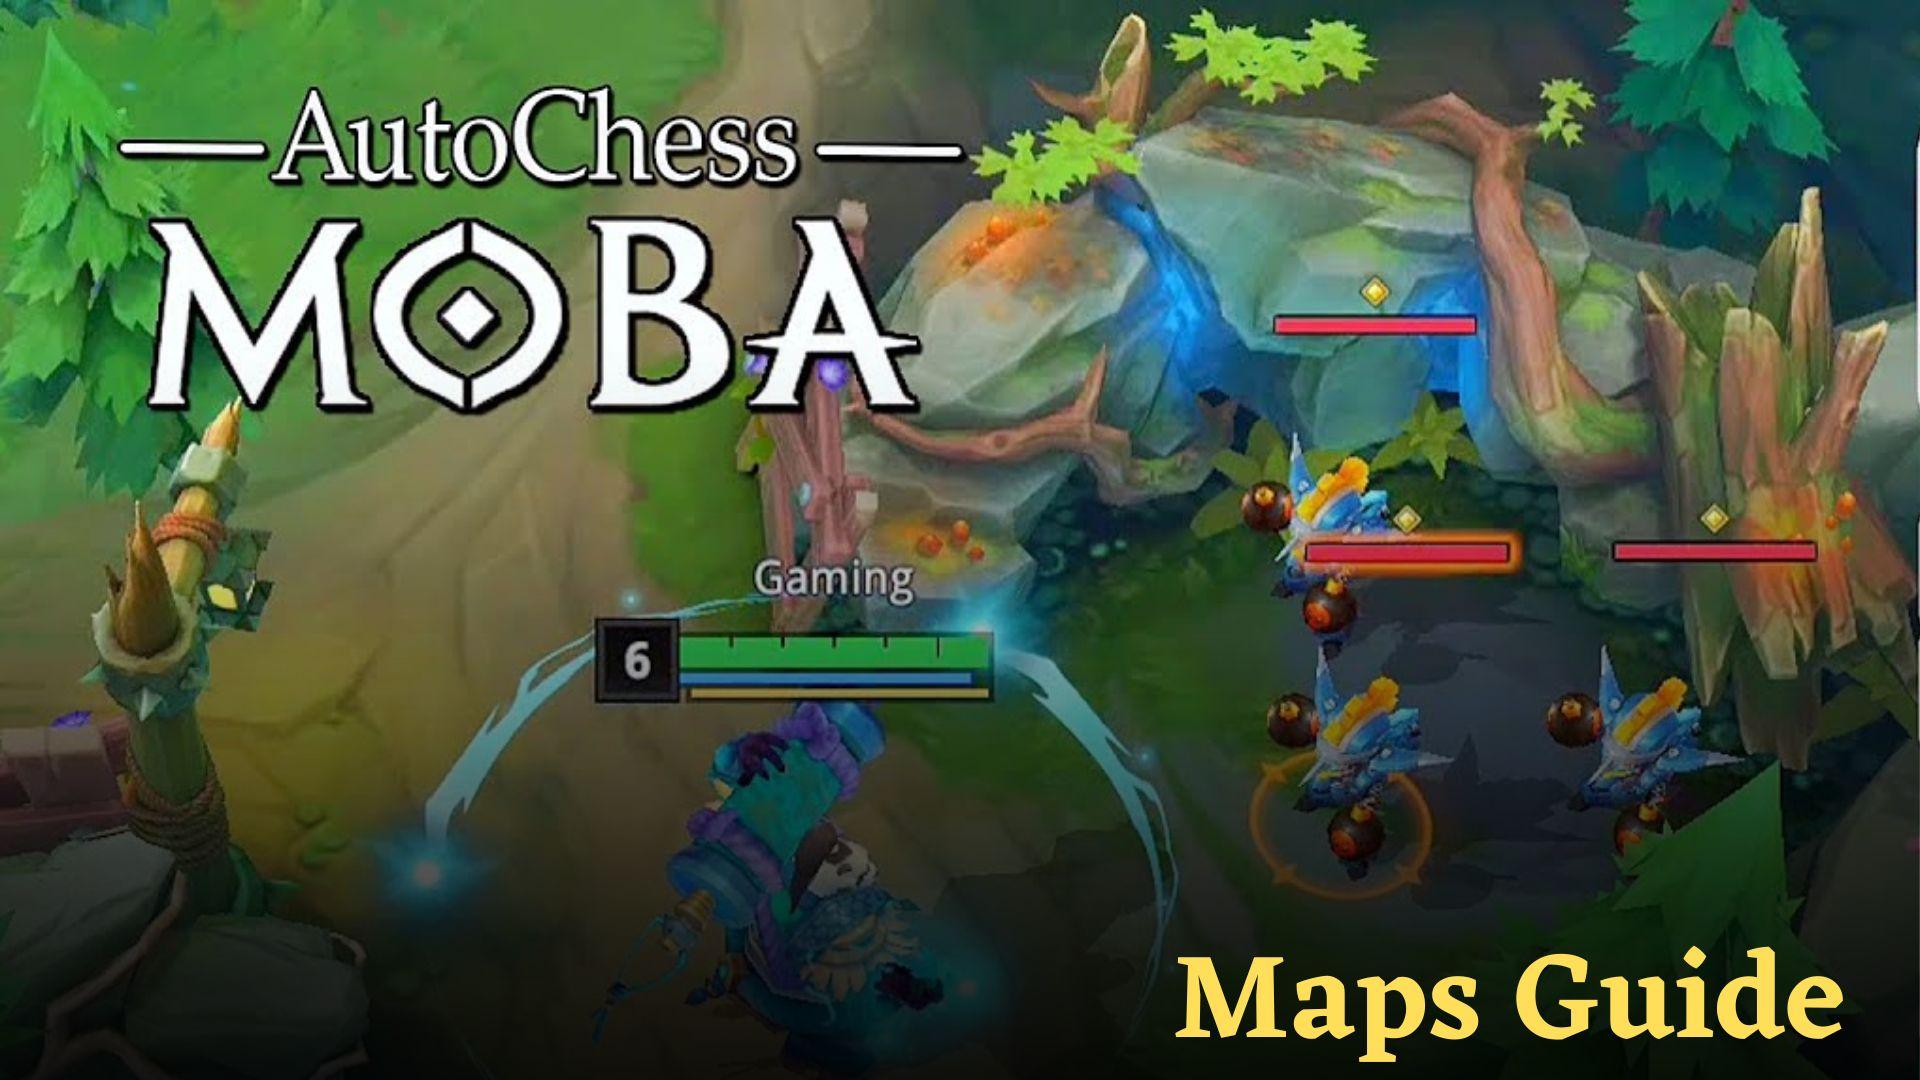 Latest AutoChess Moba News and Guides